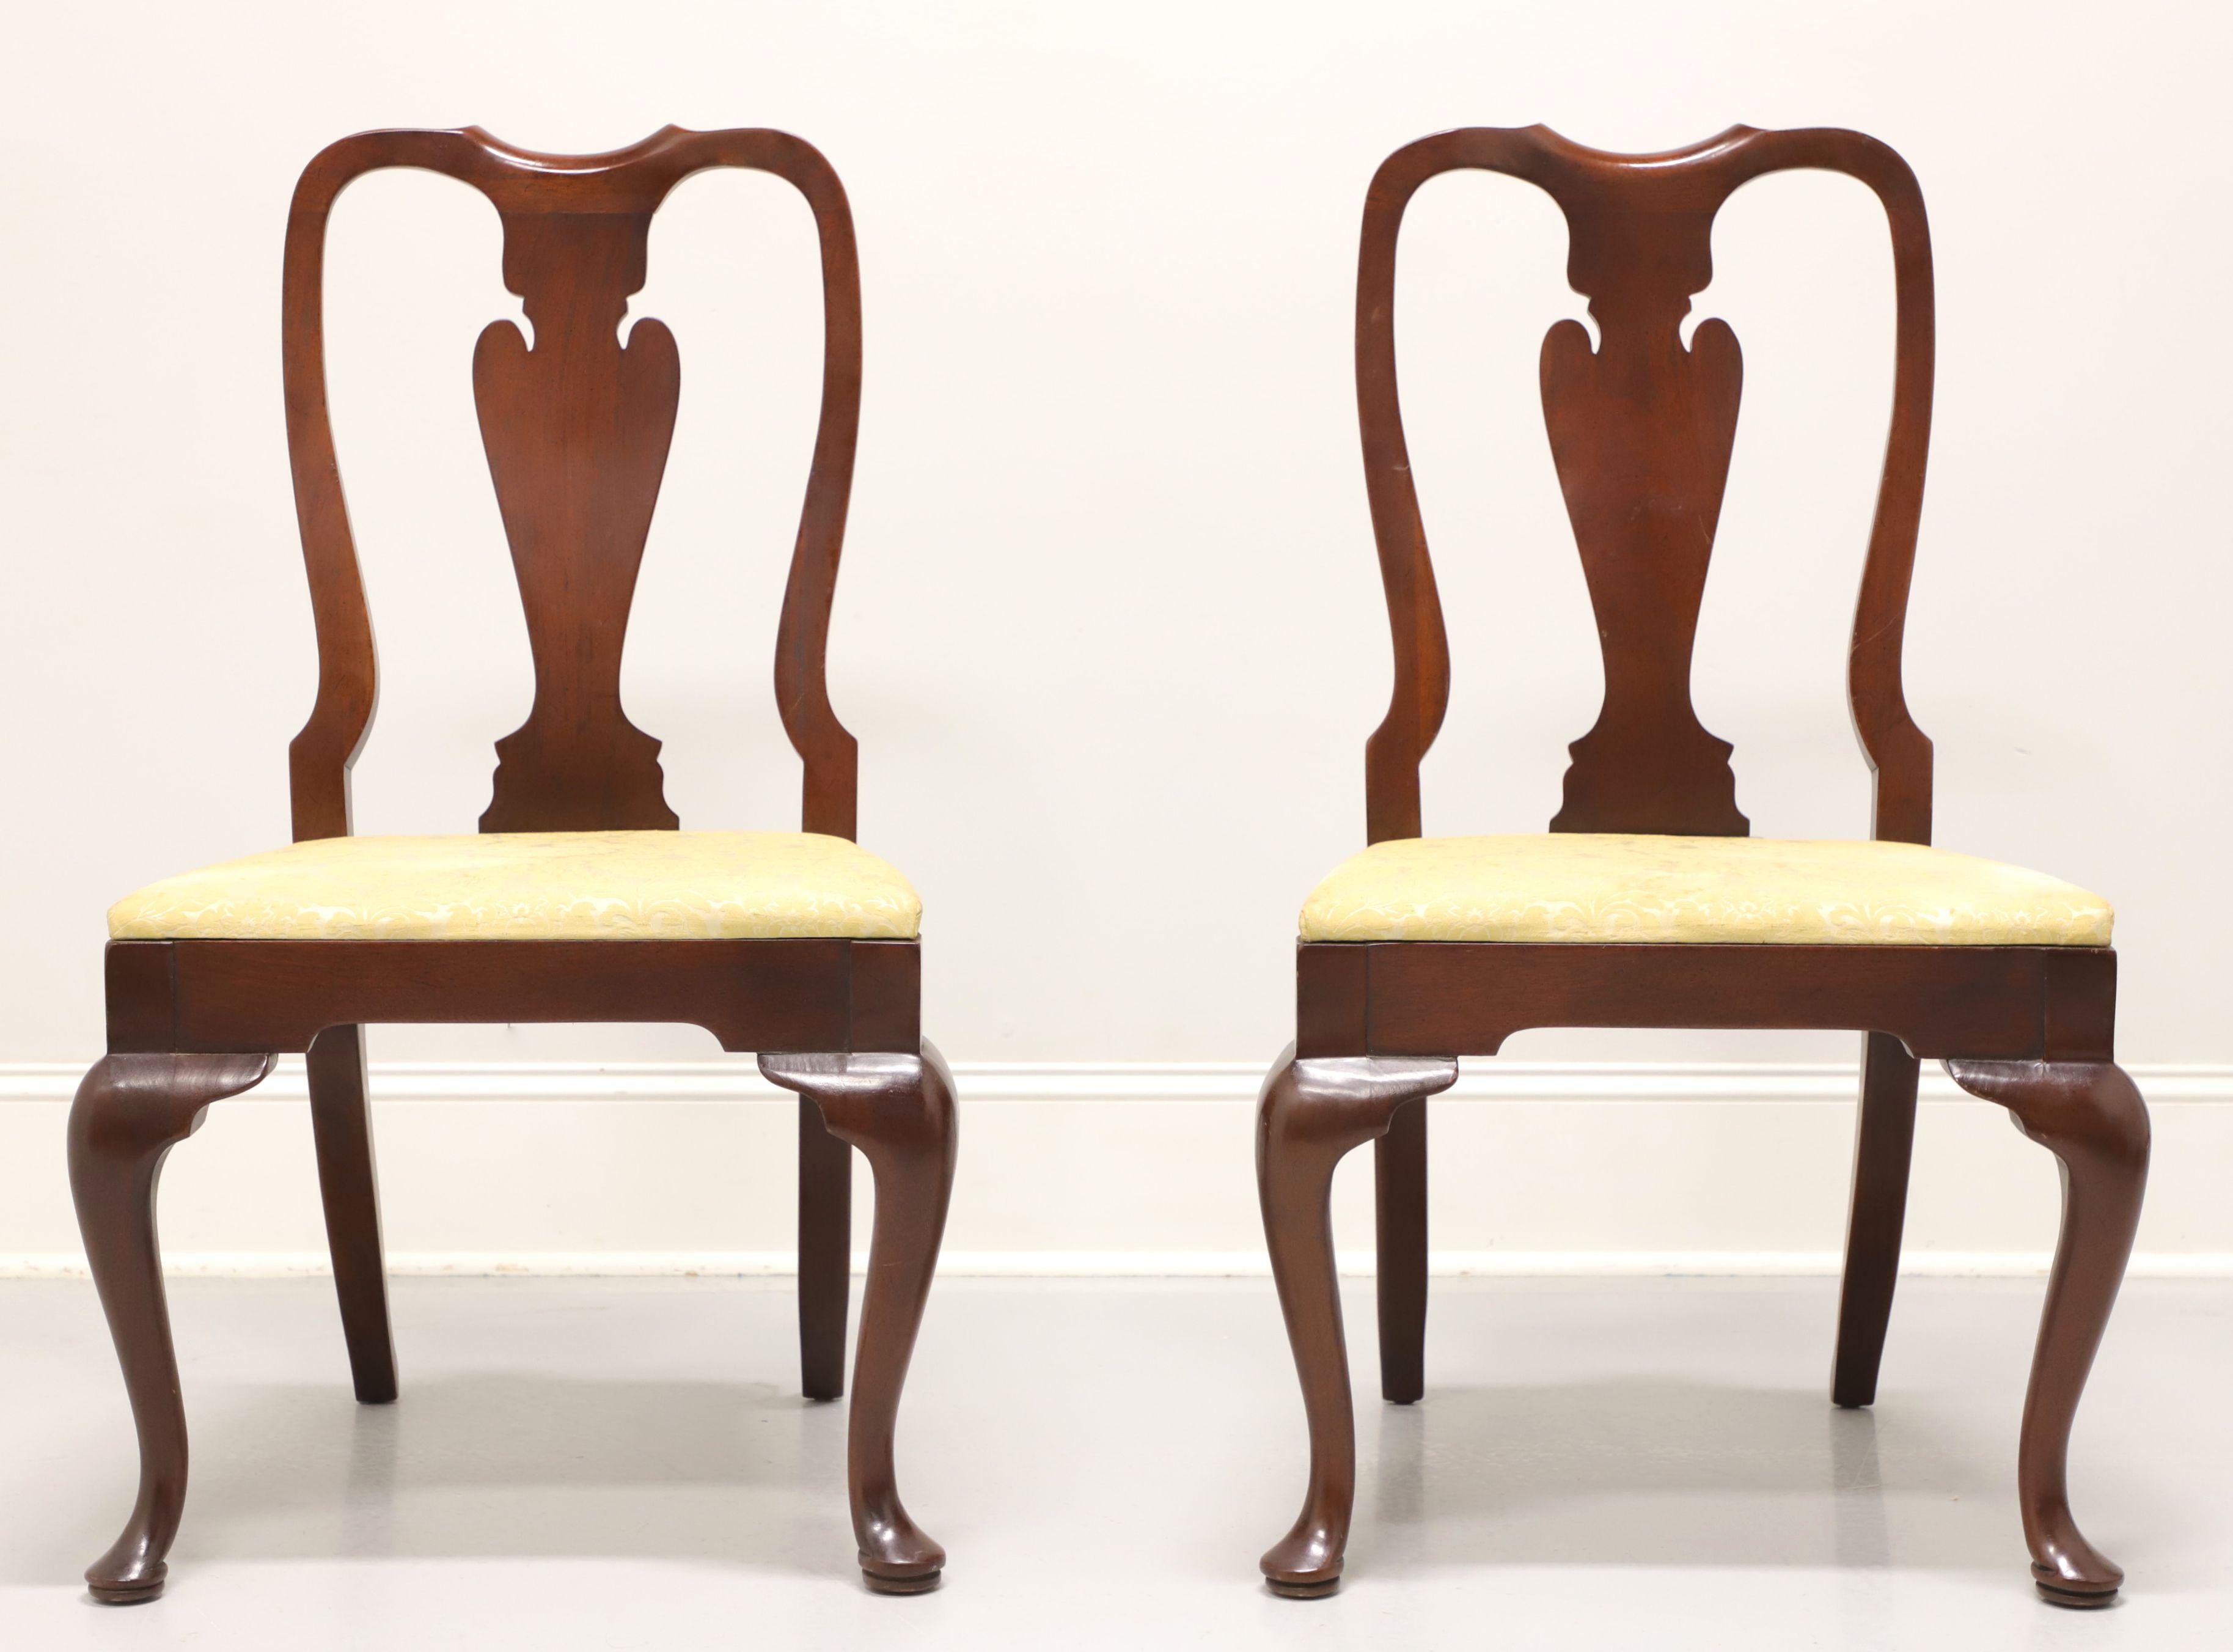 American HICKORY CHAIR Mahogany Queen Anne Dining Side Chairs - Pair A